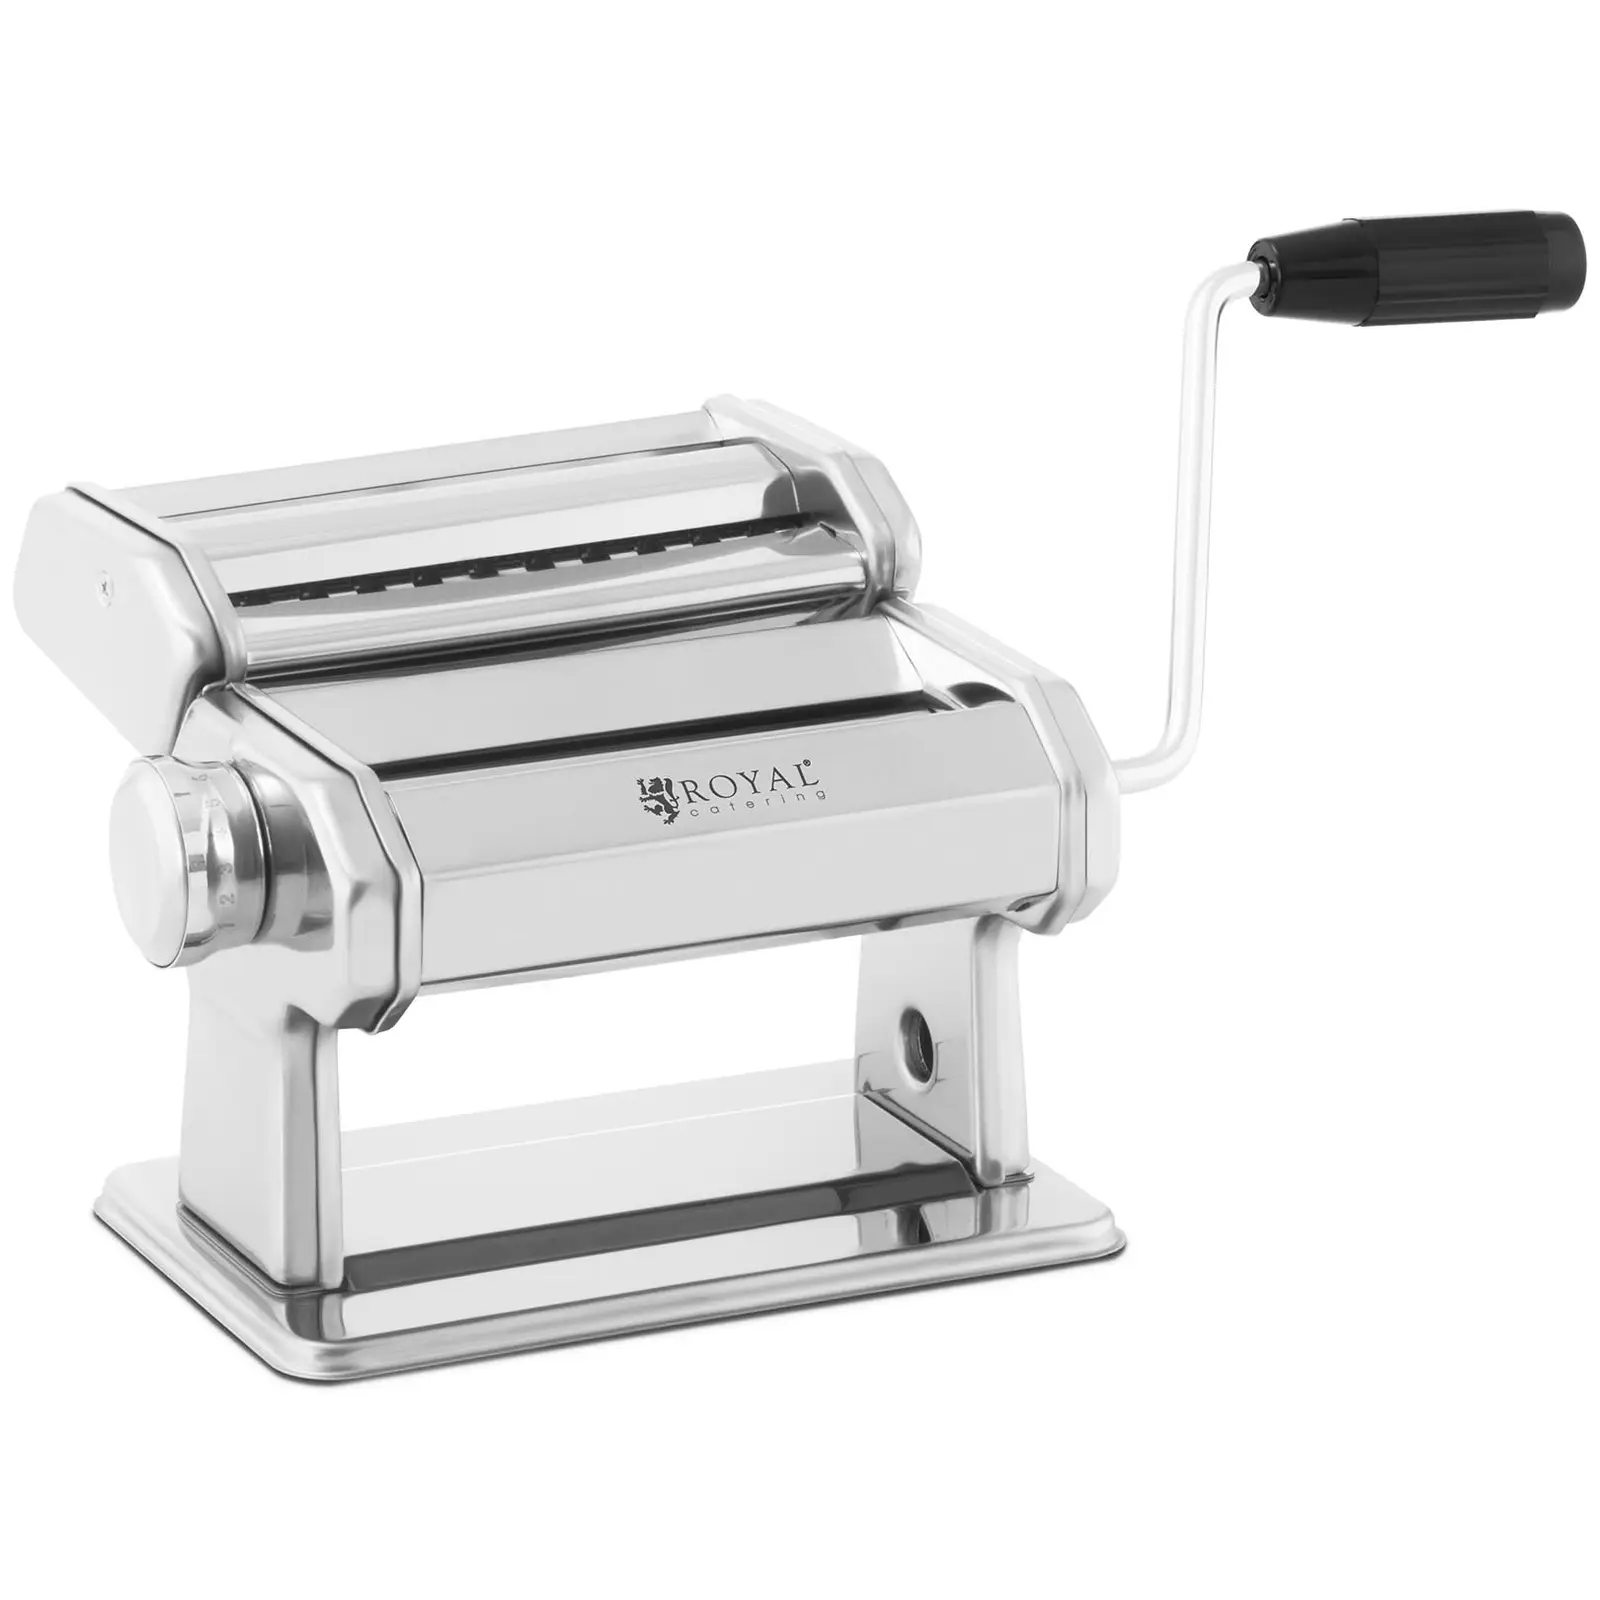 Pasta Machine - 14 cm - 0.5 to 3 mm - manual - removable cutting attachment